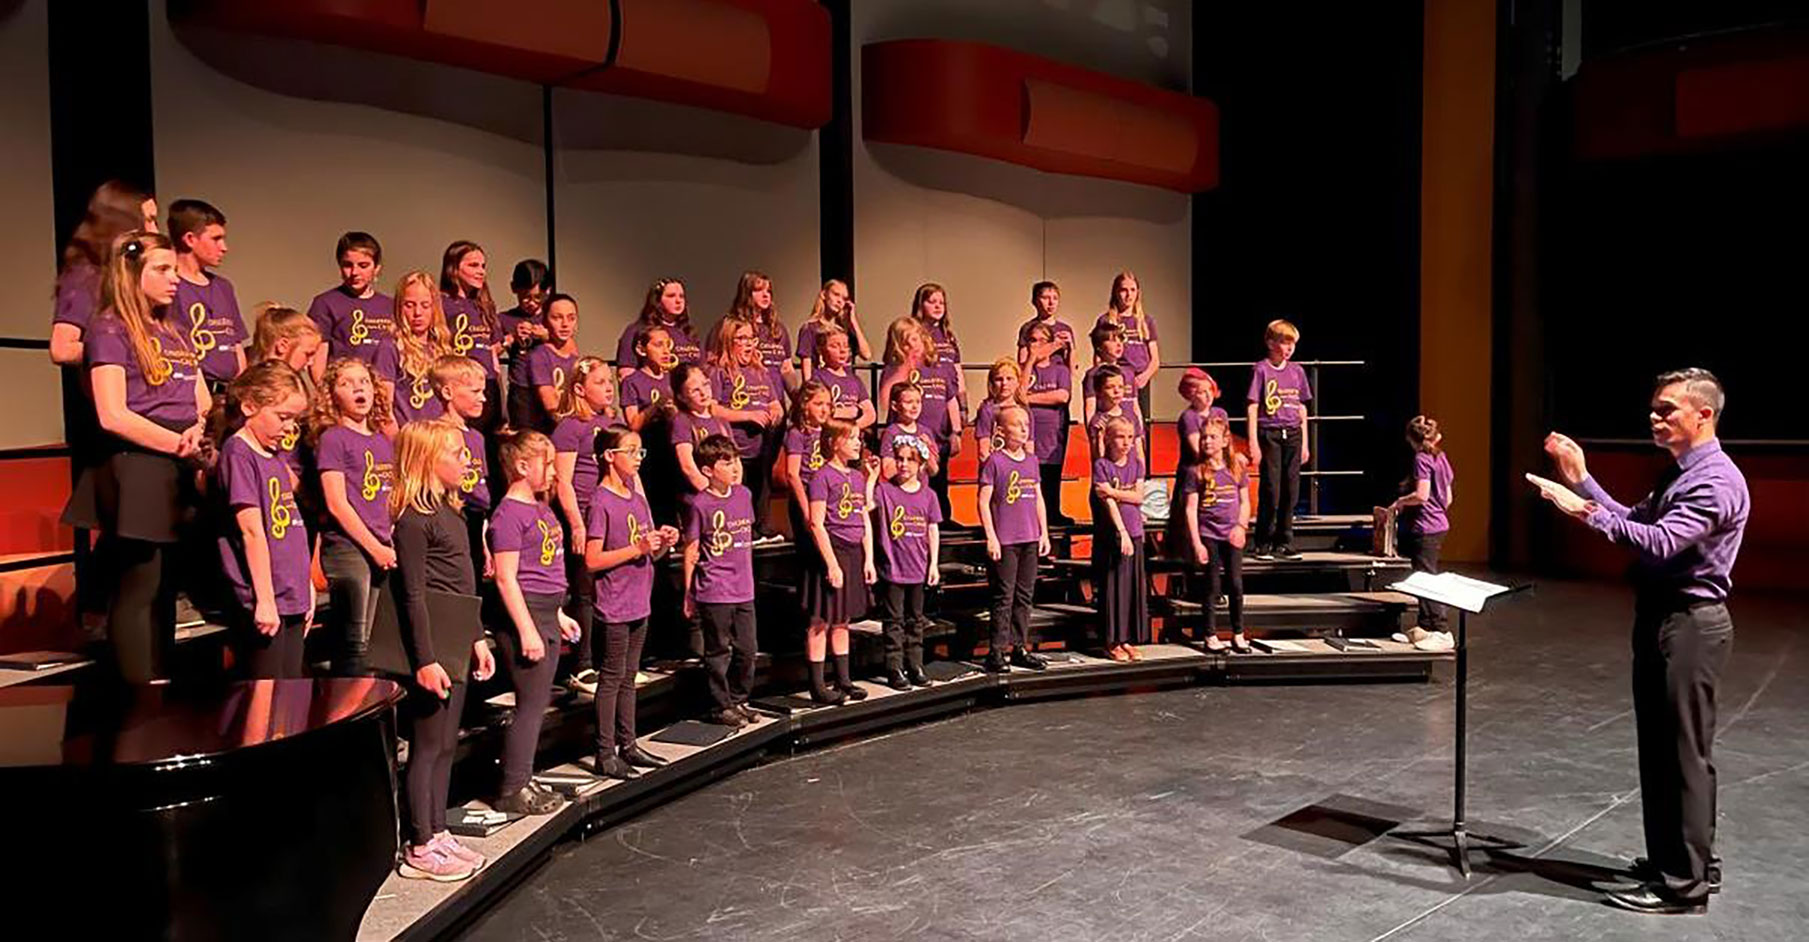 Children choir on stage performing.